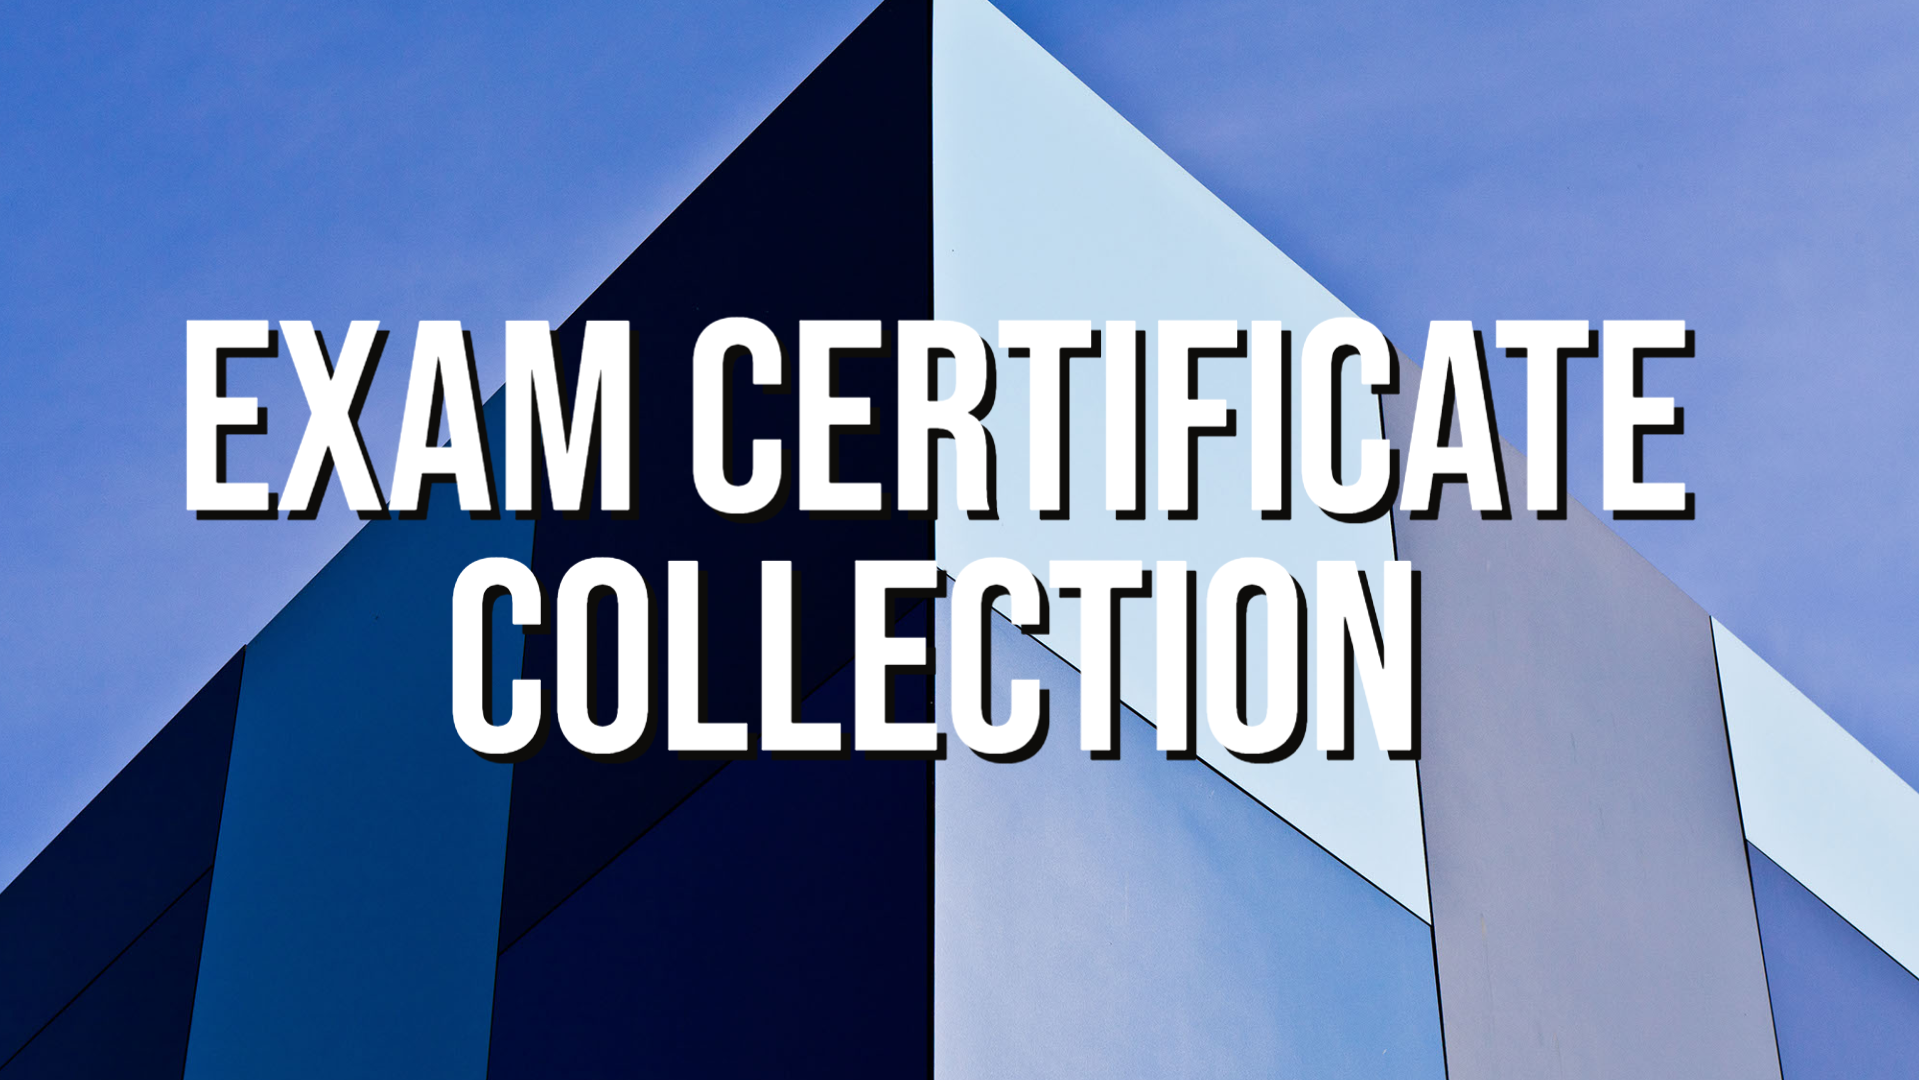 Exam Certificate Collection